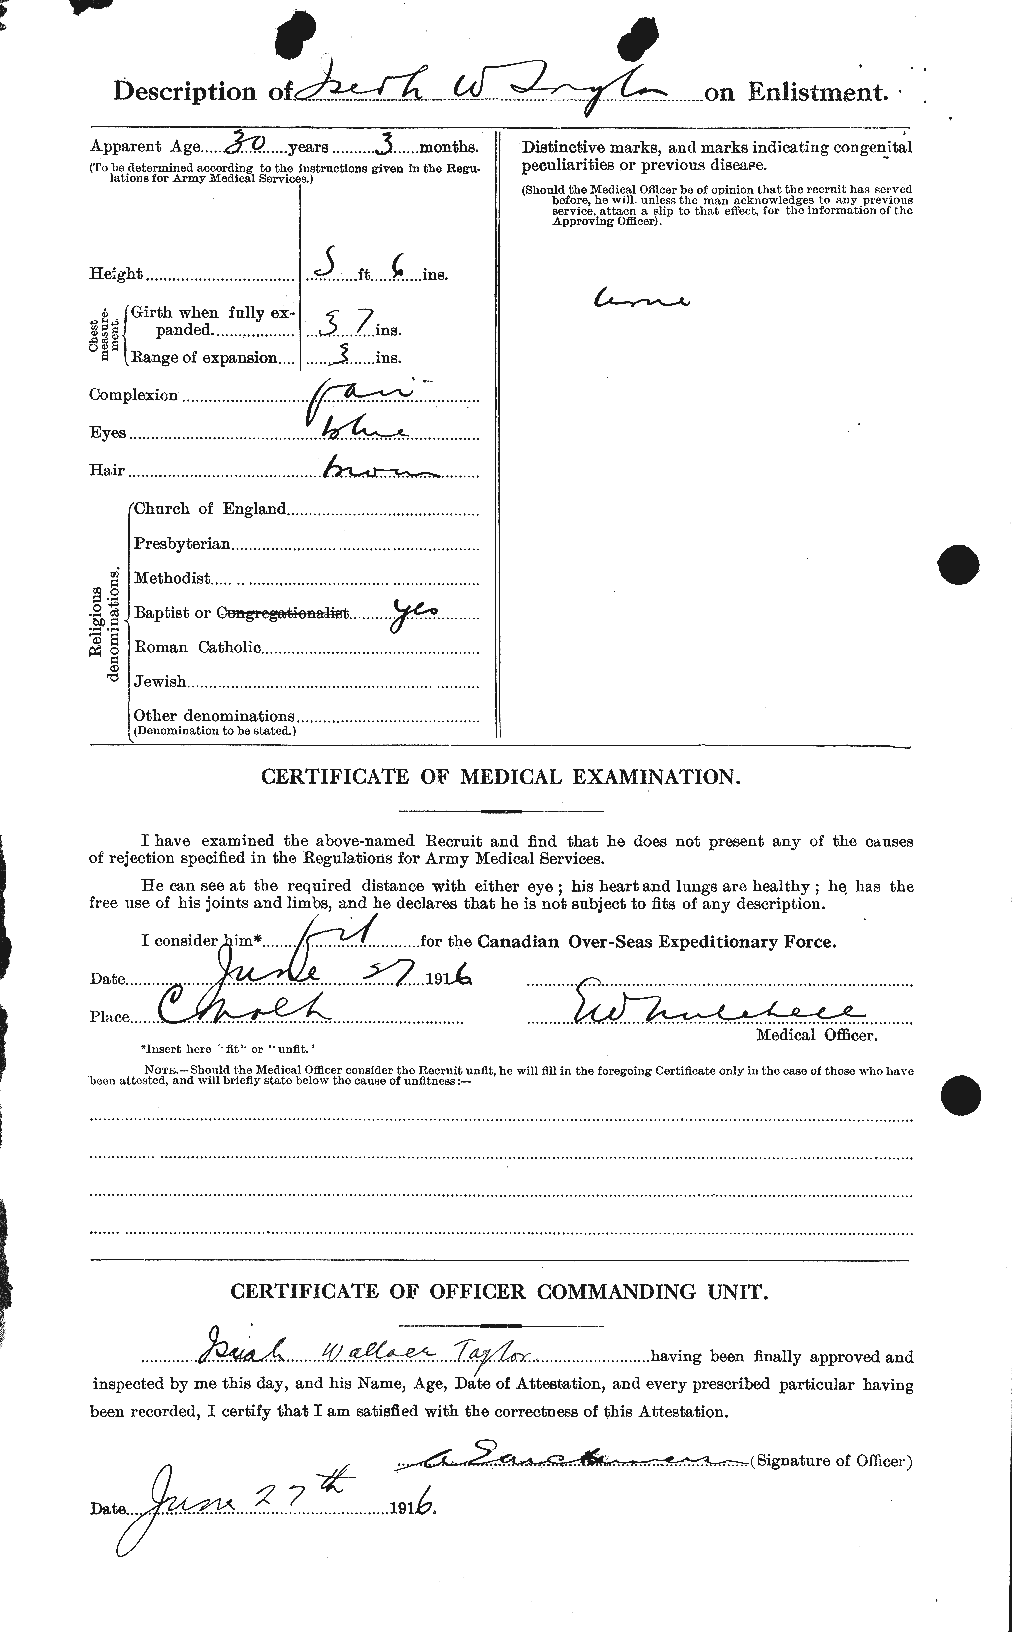 Personnel Records of the First World War - CEF 626633b